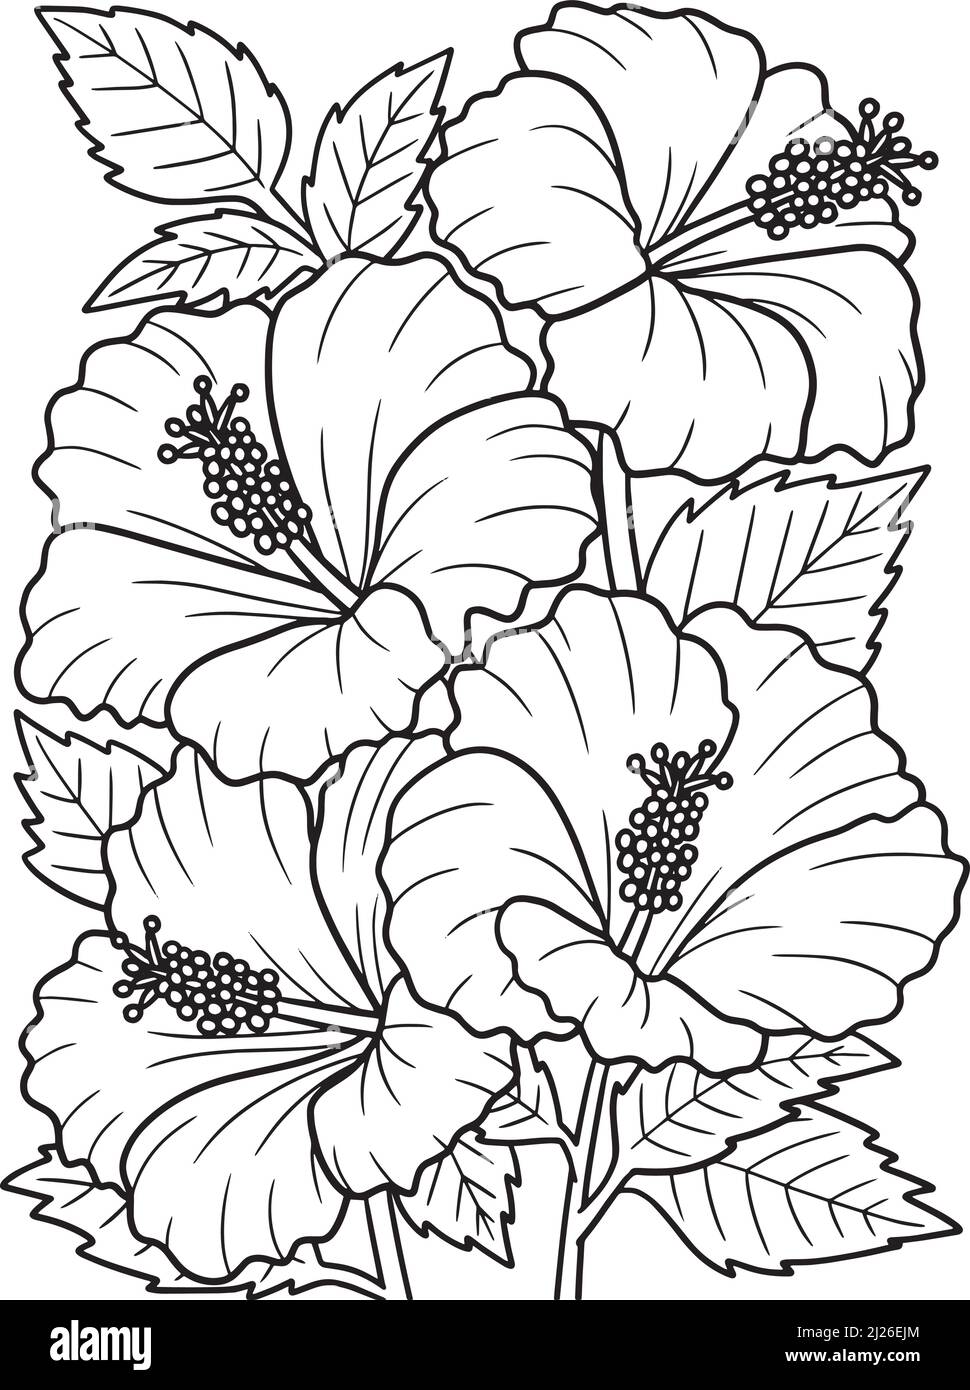 Hibiscus Flower Coloring Page for Adults Stock Vector Image & Art ...